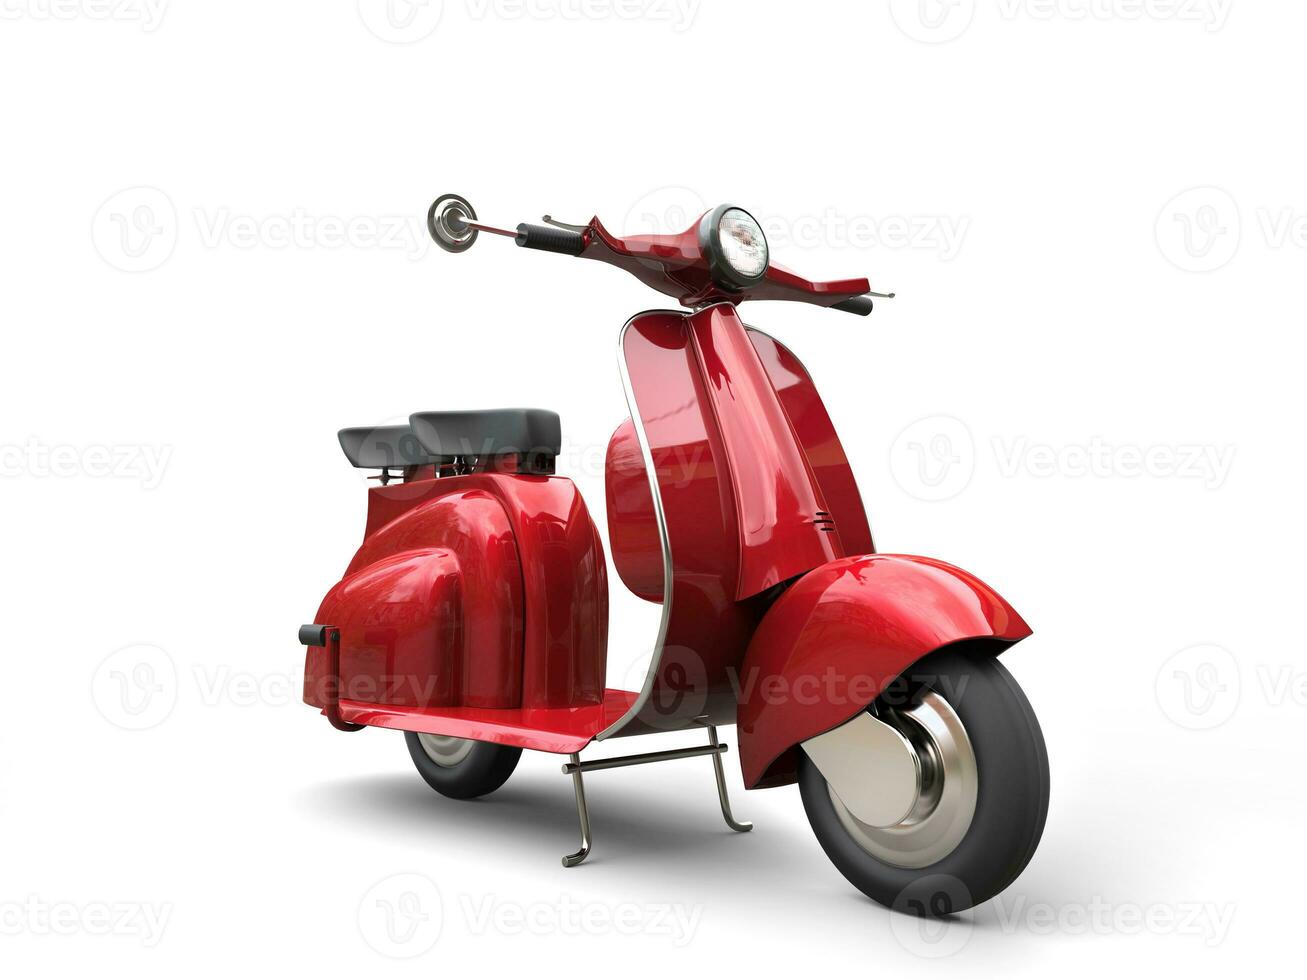 Cherry red vintage scooter photo